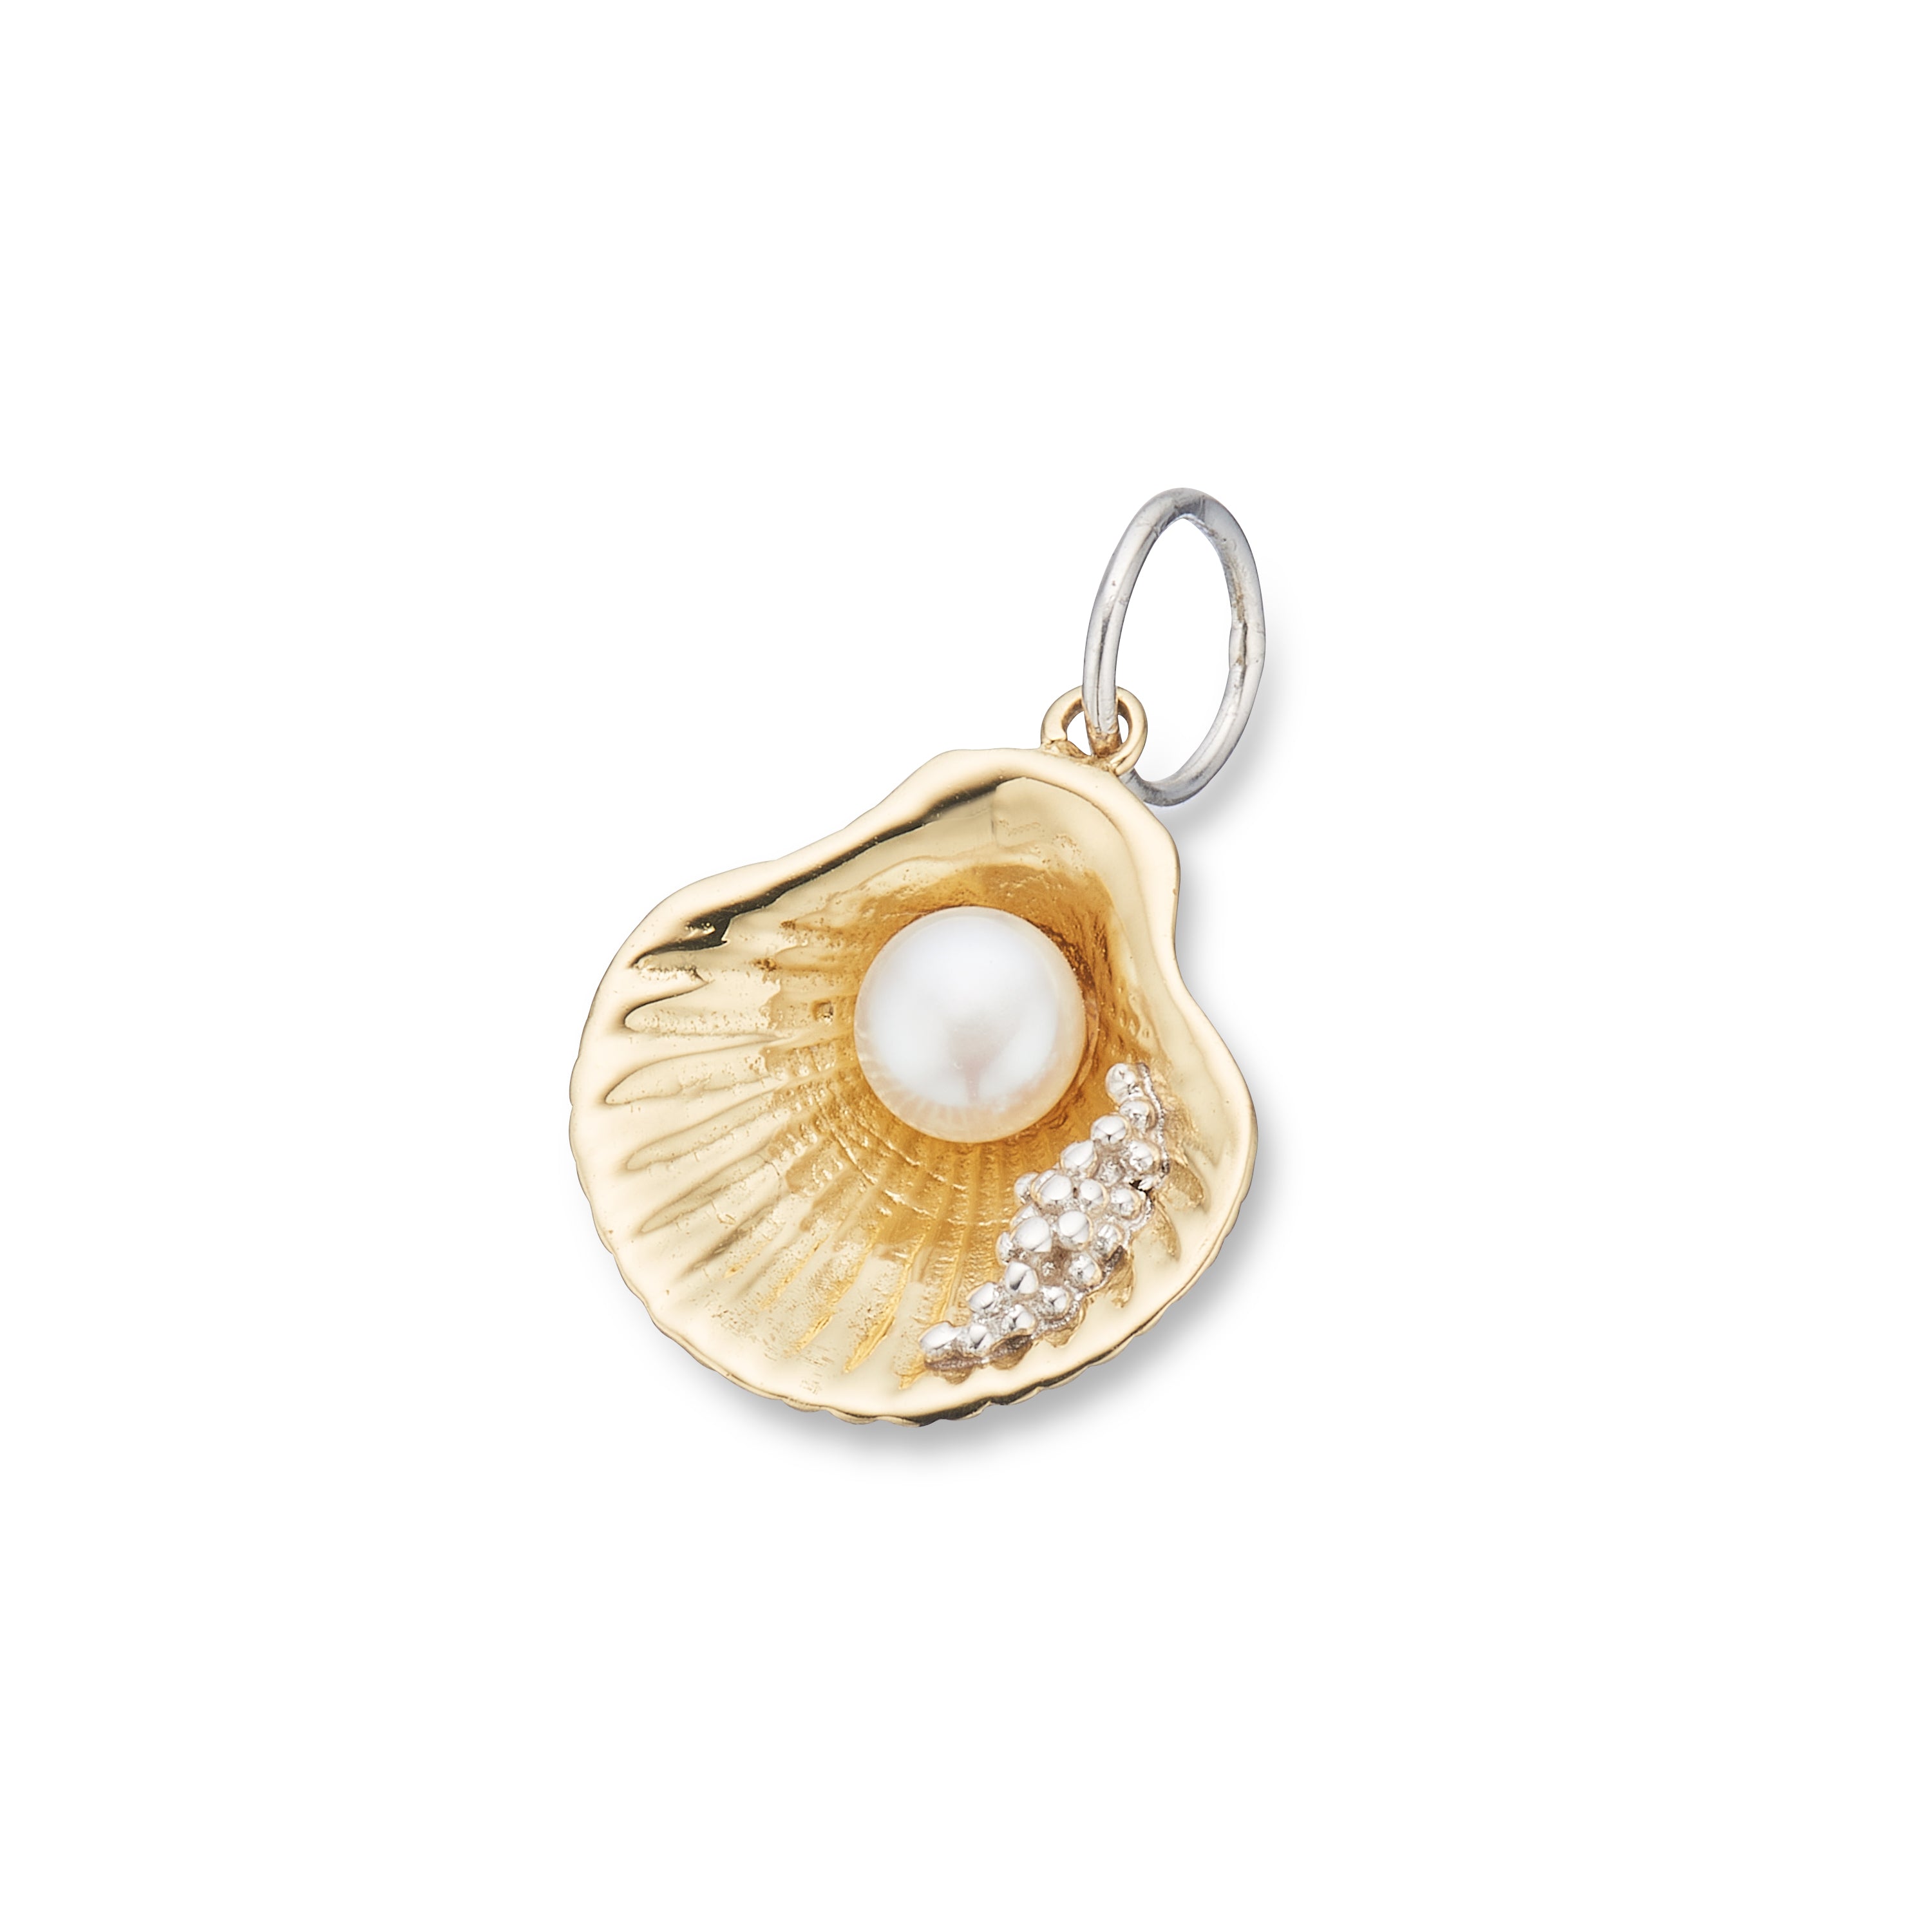 Gift of the sea shell charm